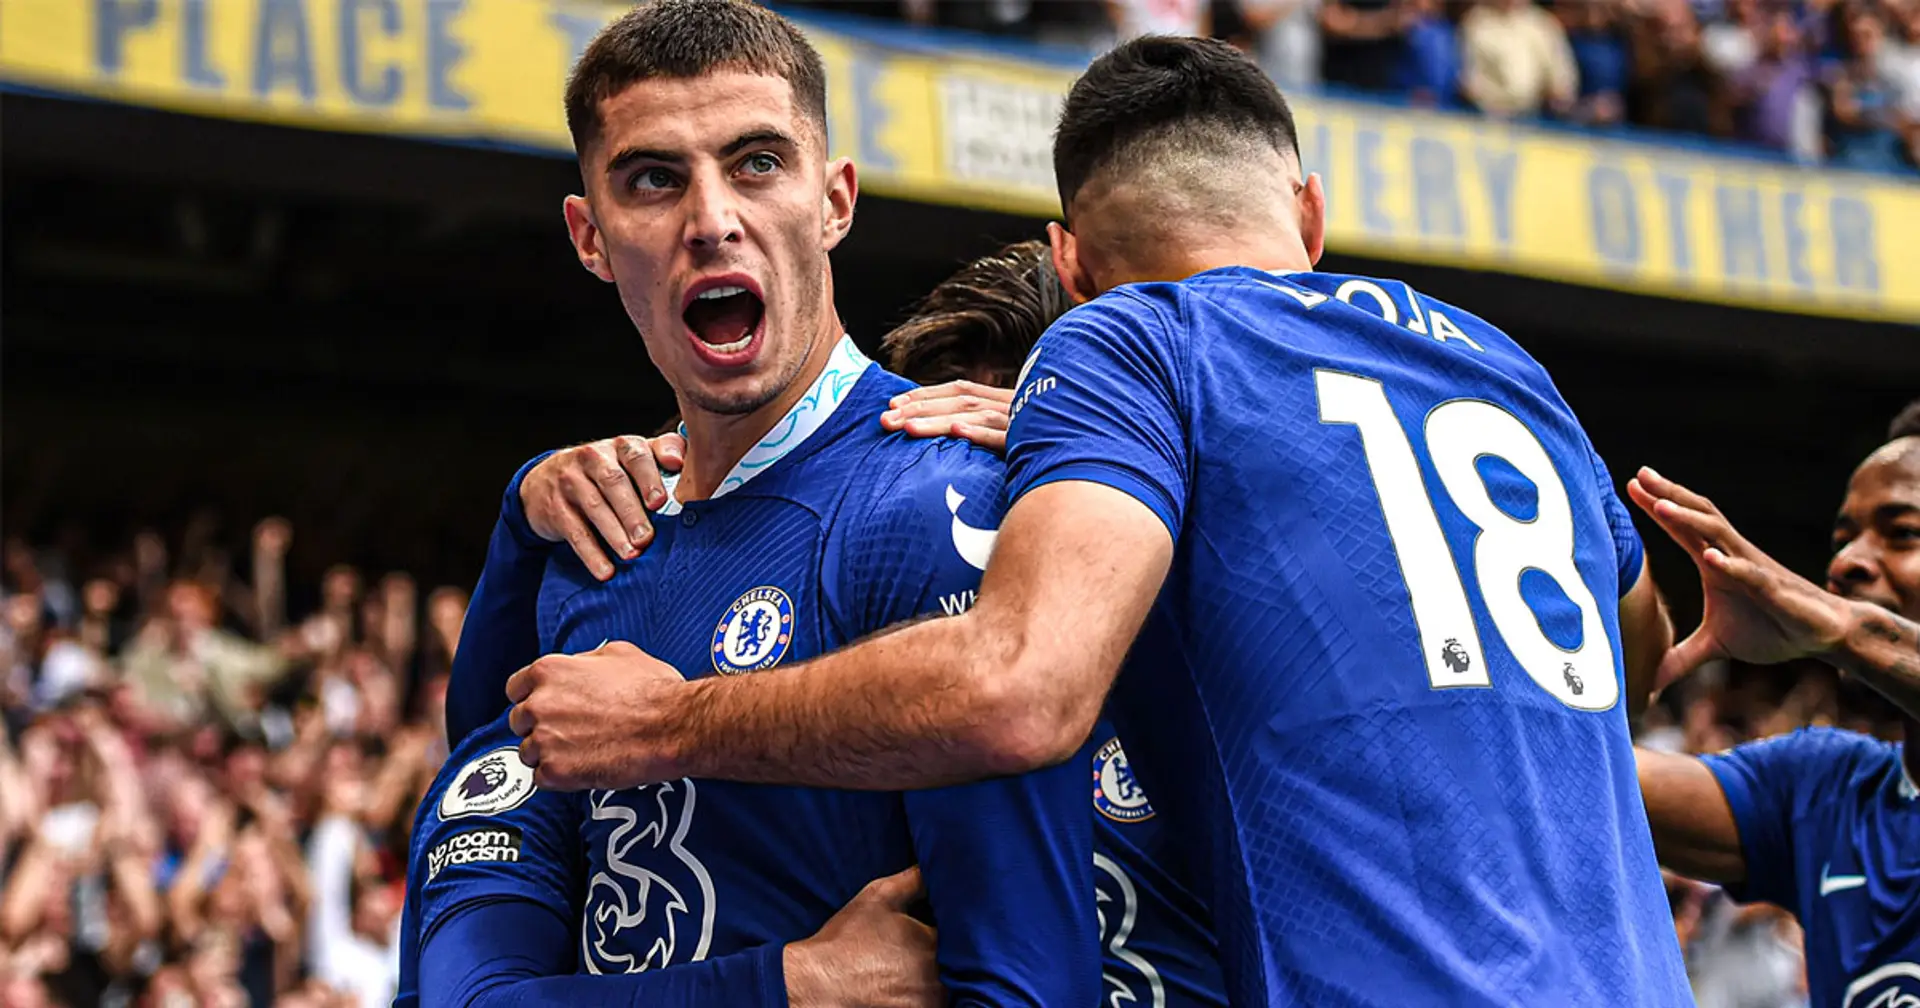 Chelsea match 13-year Premier League record with comeback win over West Ham